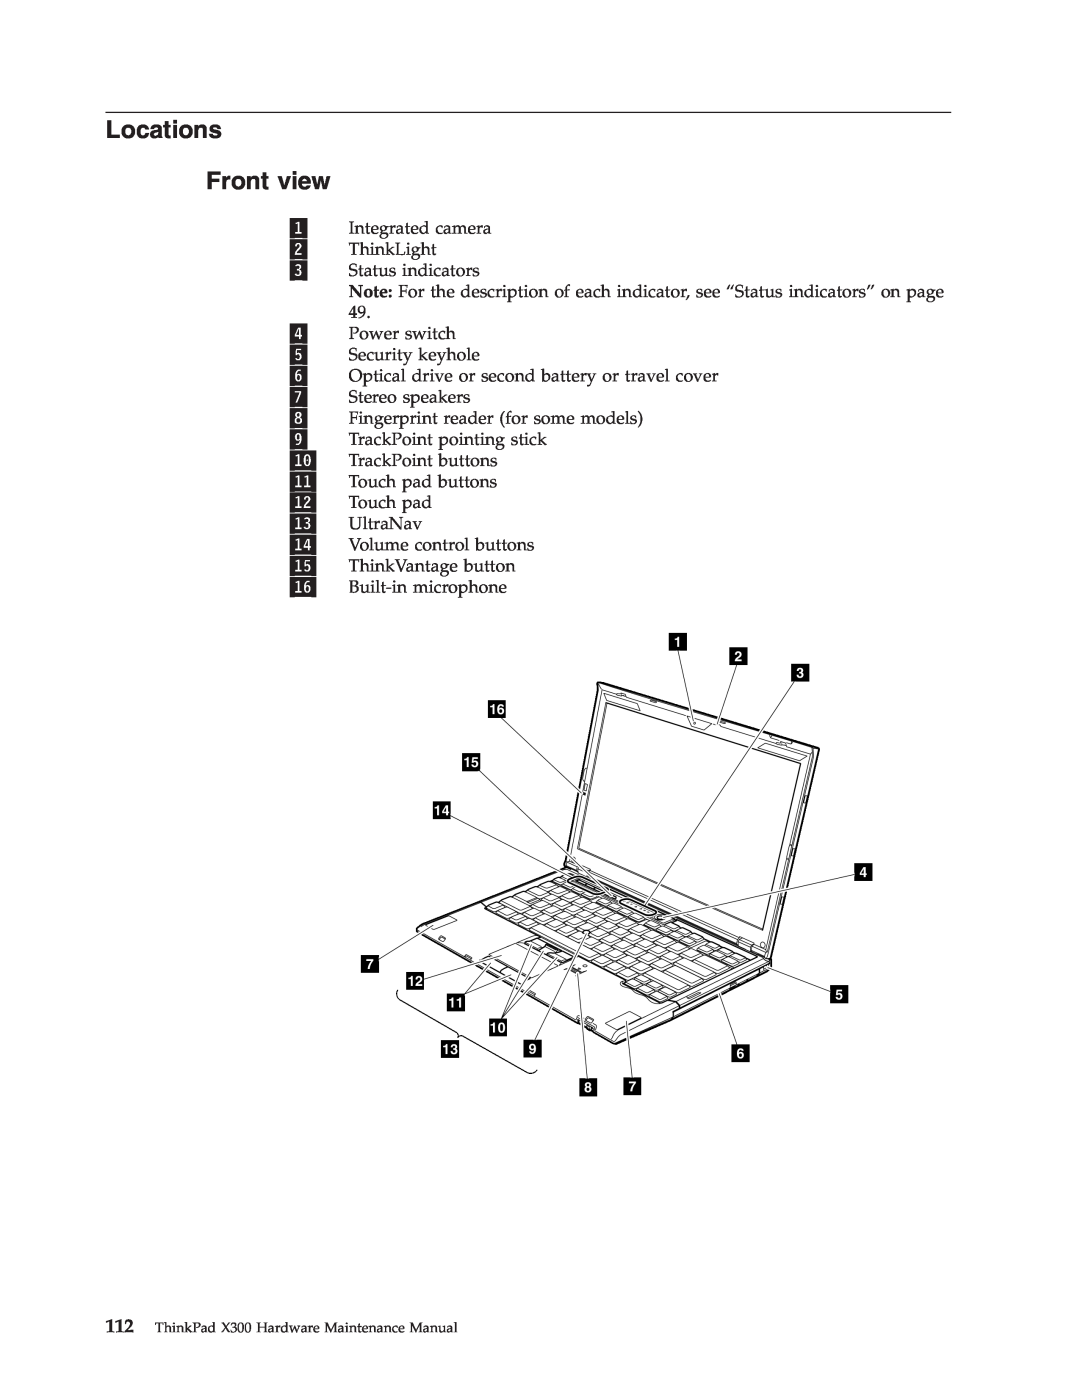 Lenovo X300 manual Locations Front view 